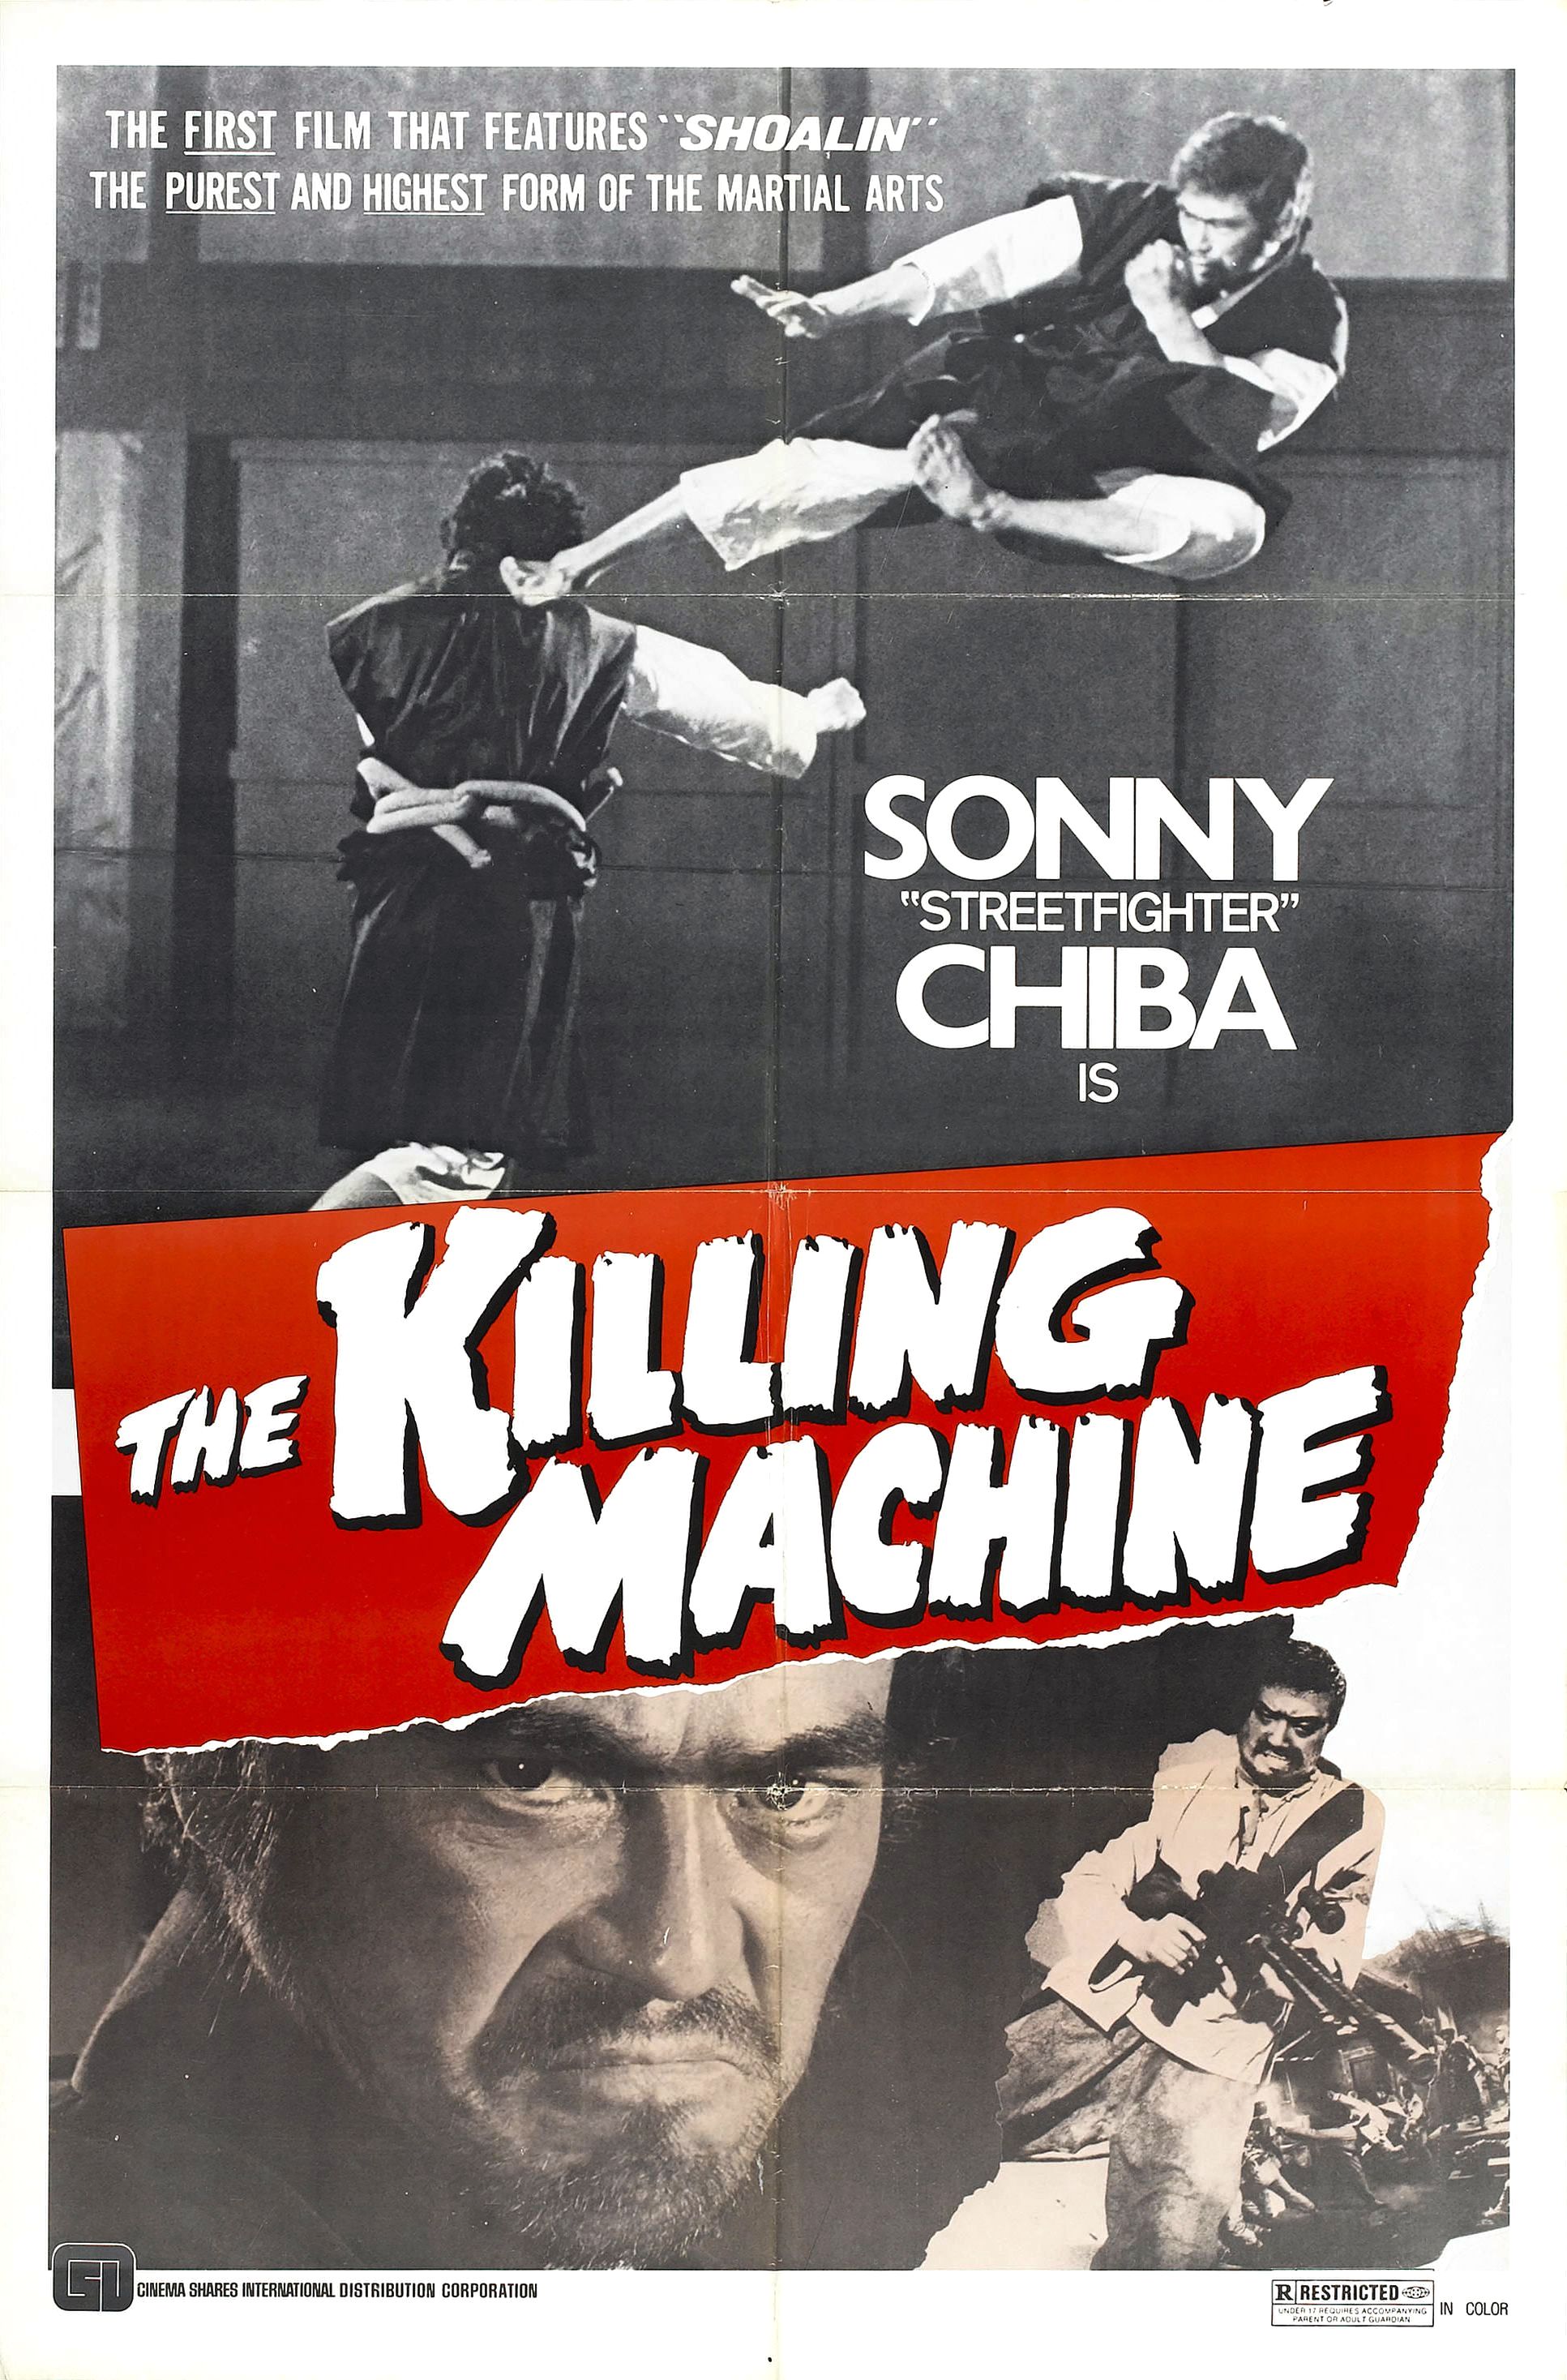 The Killing Machine with Sonny Chiba